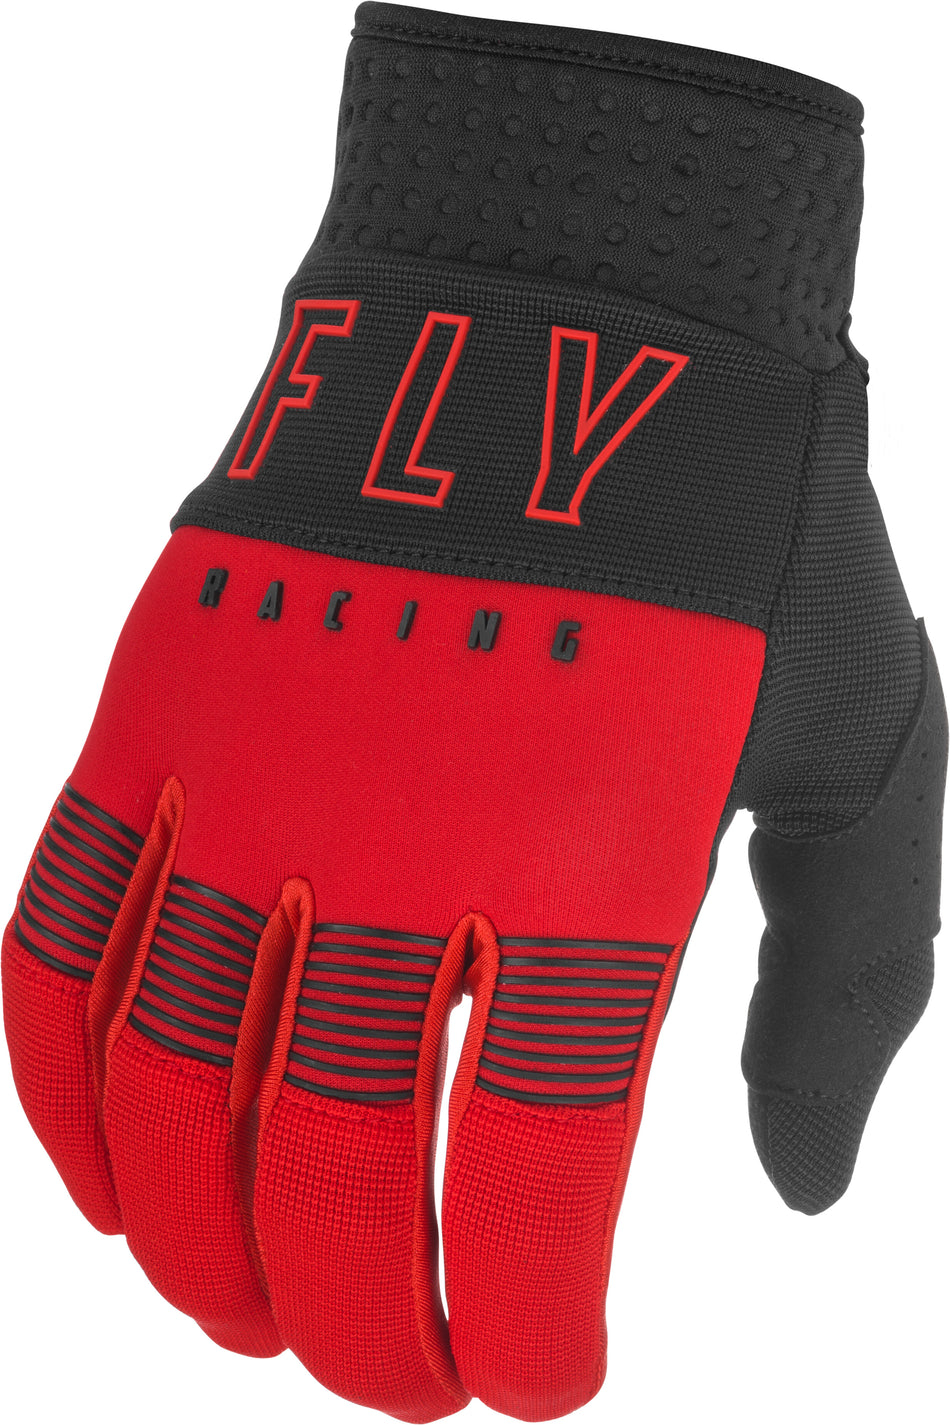 FLY RACING F-16 Gloves Red/Black Sz 12 374-91212